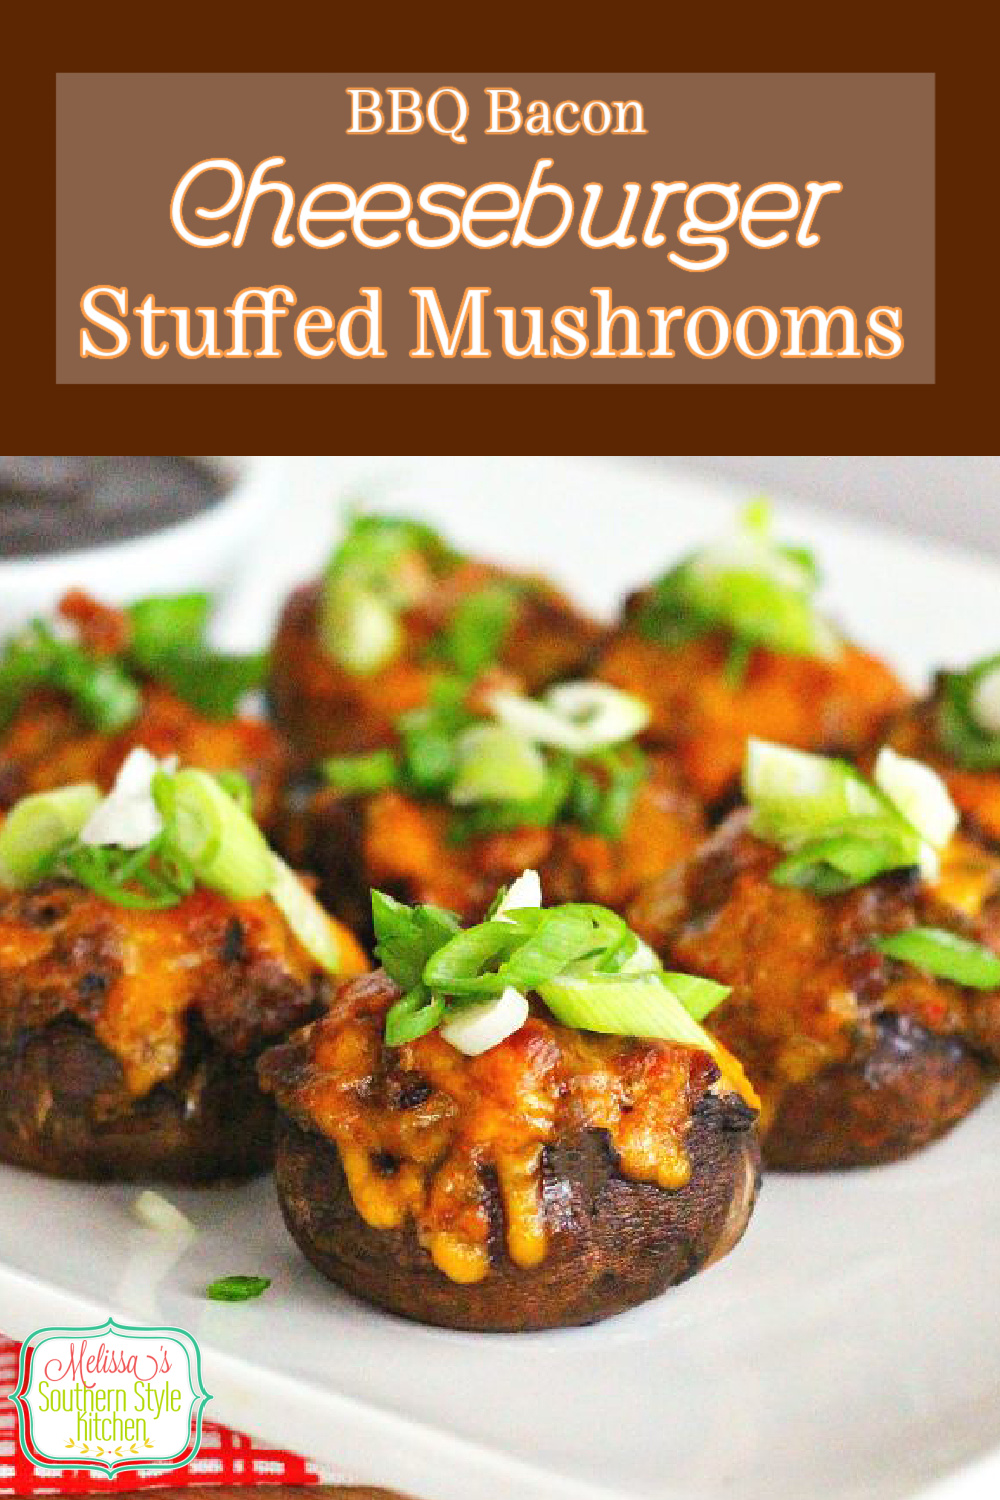 Barbecue Bacon Cheeseburger Stuffed Mushrooms for appetizers and game day snacks #mushrooms #stuffedmushrooms #cheeseburgers #barbecue #baconrecipes #appetizers #tailgating #lowcarb #lowcarbrecipes #southernrecipes #footballfood #superbowlrecipes #melissassouthernstylekitchen via @melissasssk